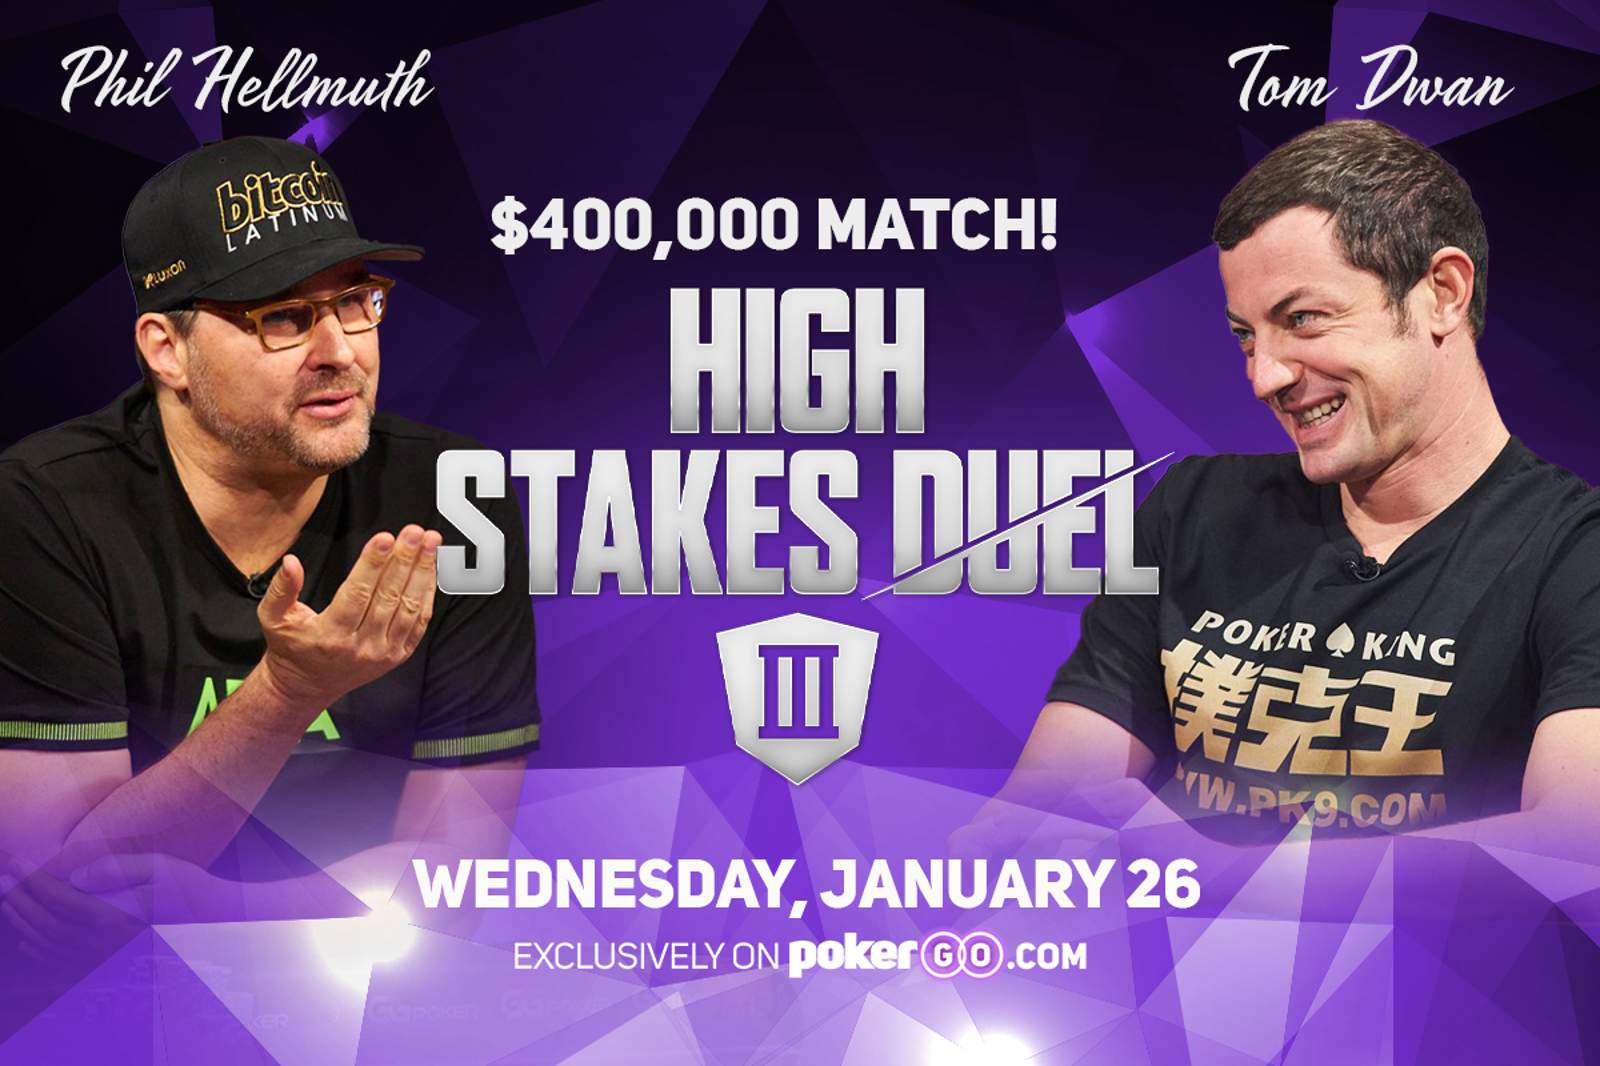 Phil Hellmuth Takes On Tom Dwan In 'High Stakes Duel' $400,000 Poker Match On January 26, Exclusively On PokerGO®